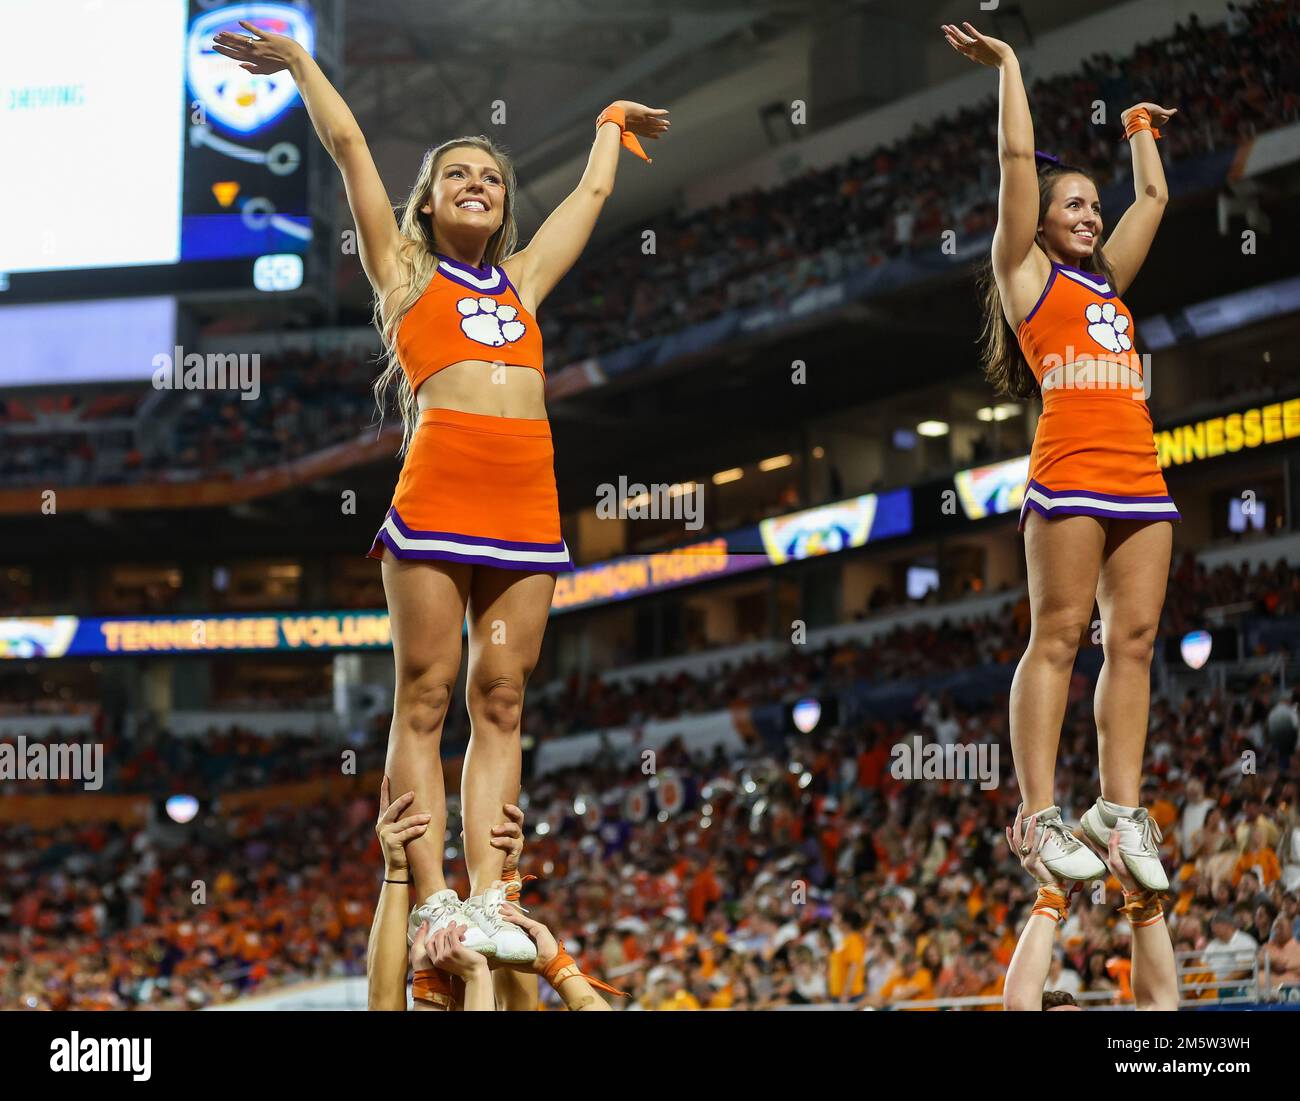 Miami Gardens, FL, USA. 30th Dec, 2022. Clemson cheerleaders entertain the fans during the 2022 Capital One Orange Bowl football game between the Clemson Tigers and Tennessee Volunteers at Hard Rock Stadium in Miami Gardens, FL. Kyle Okita/CSM/Alamy Live News Stock Photo